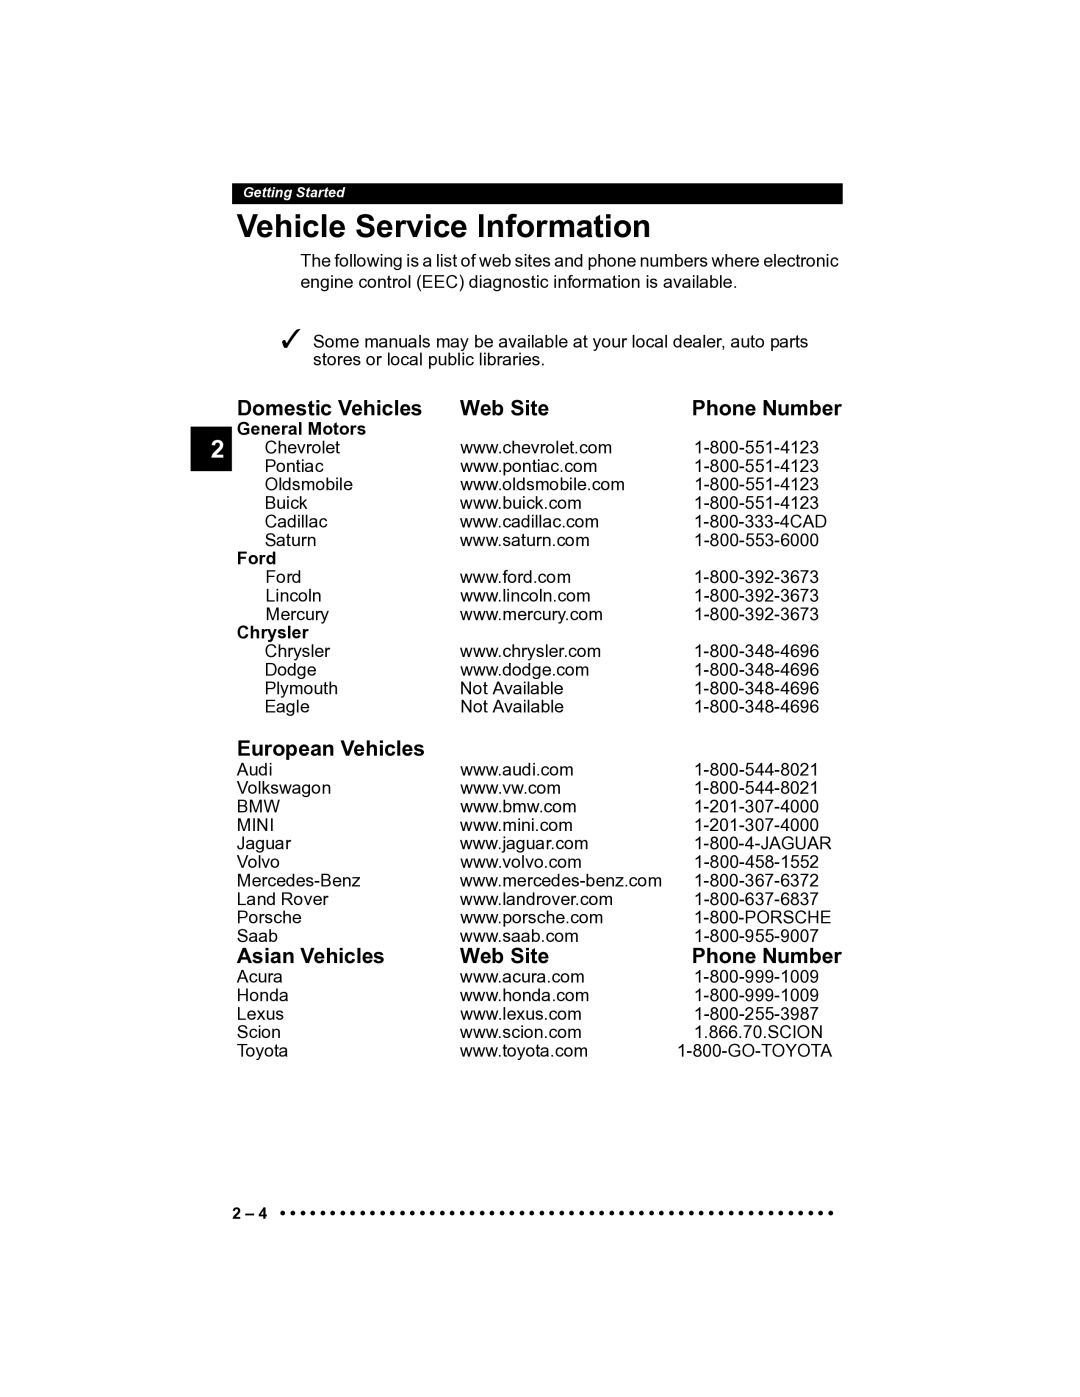 Actron CP9185 manual Vehicle Service Information, Domestic Vehicles Web Site, European Vehicles, Asian Vehicles Web Site 